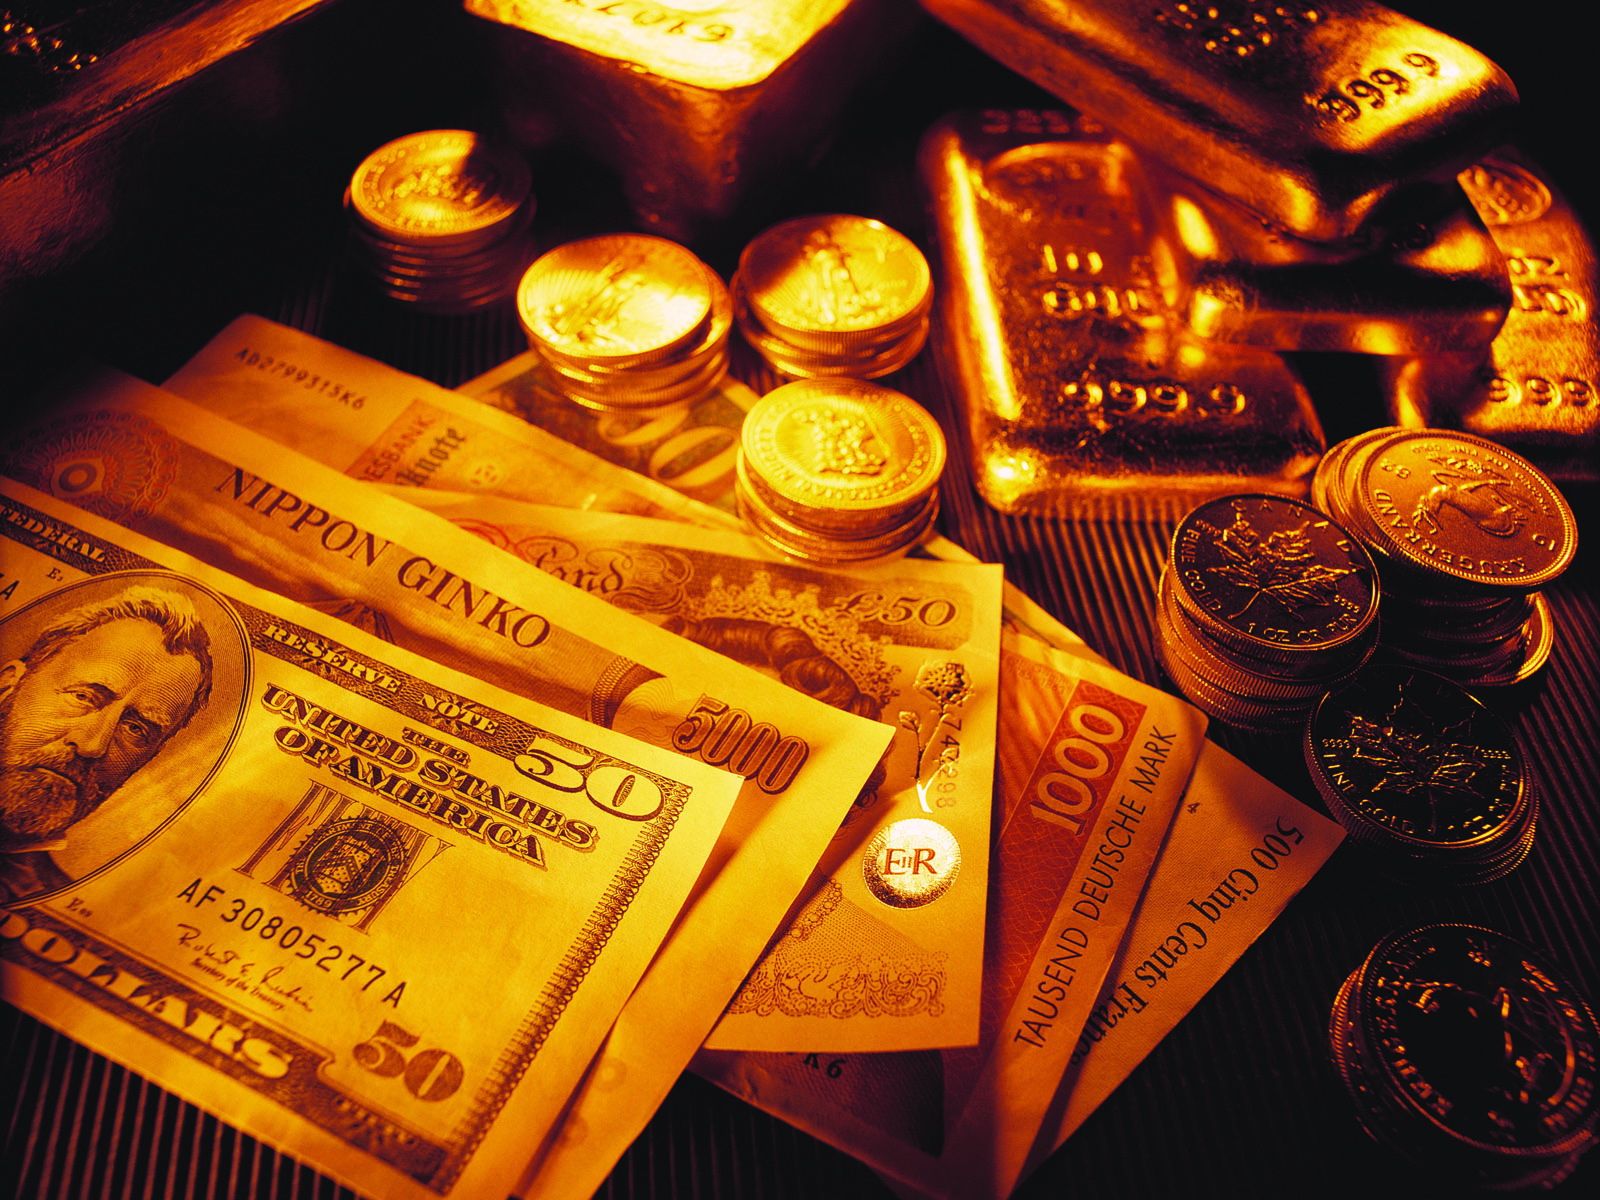 Gold and Money wallpaper and image, picture, photo